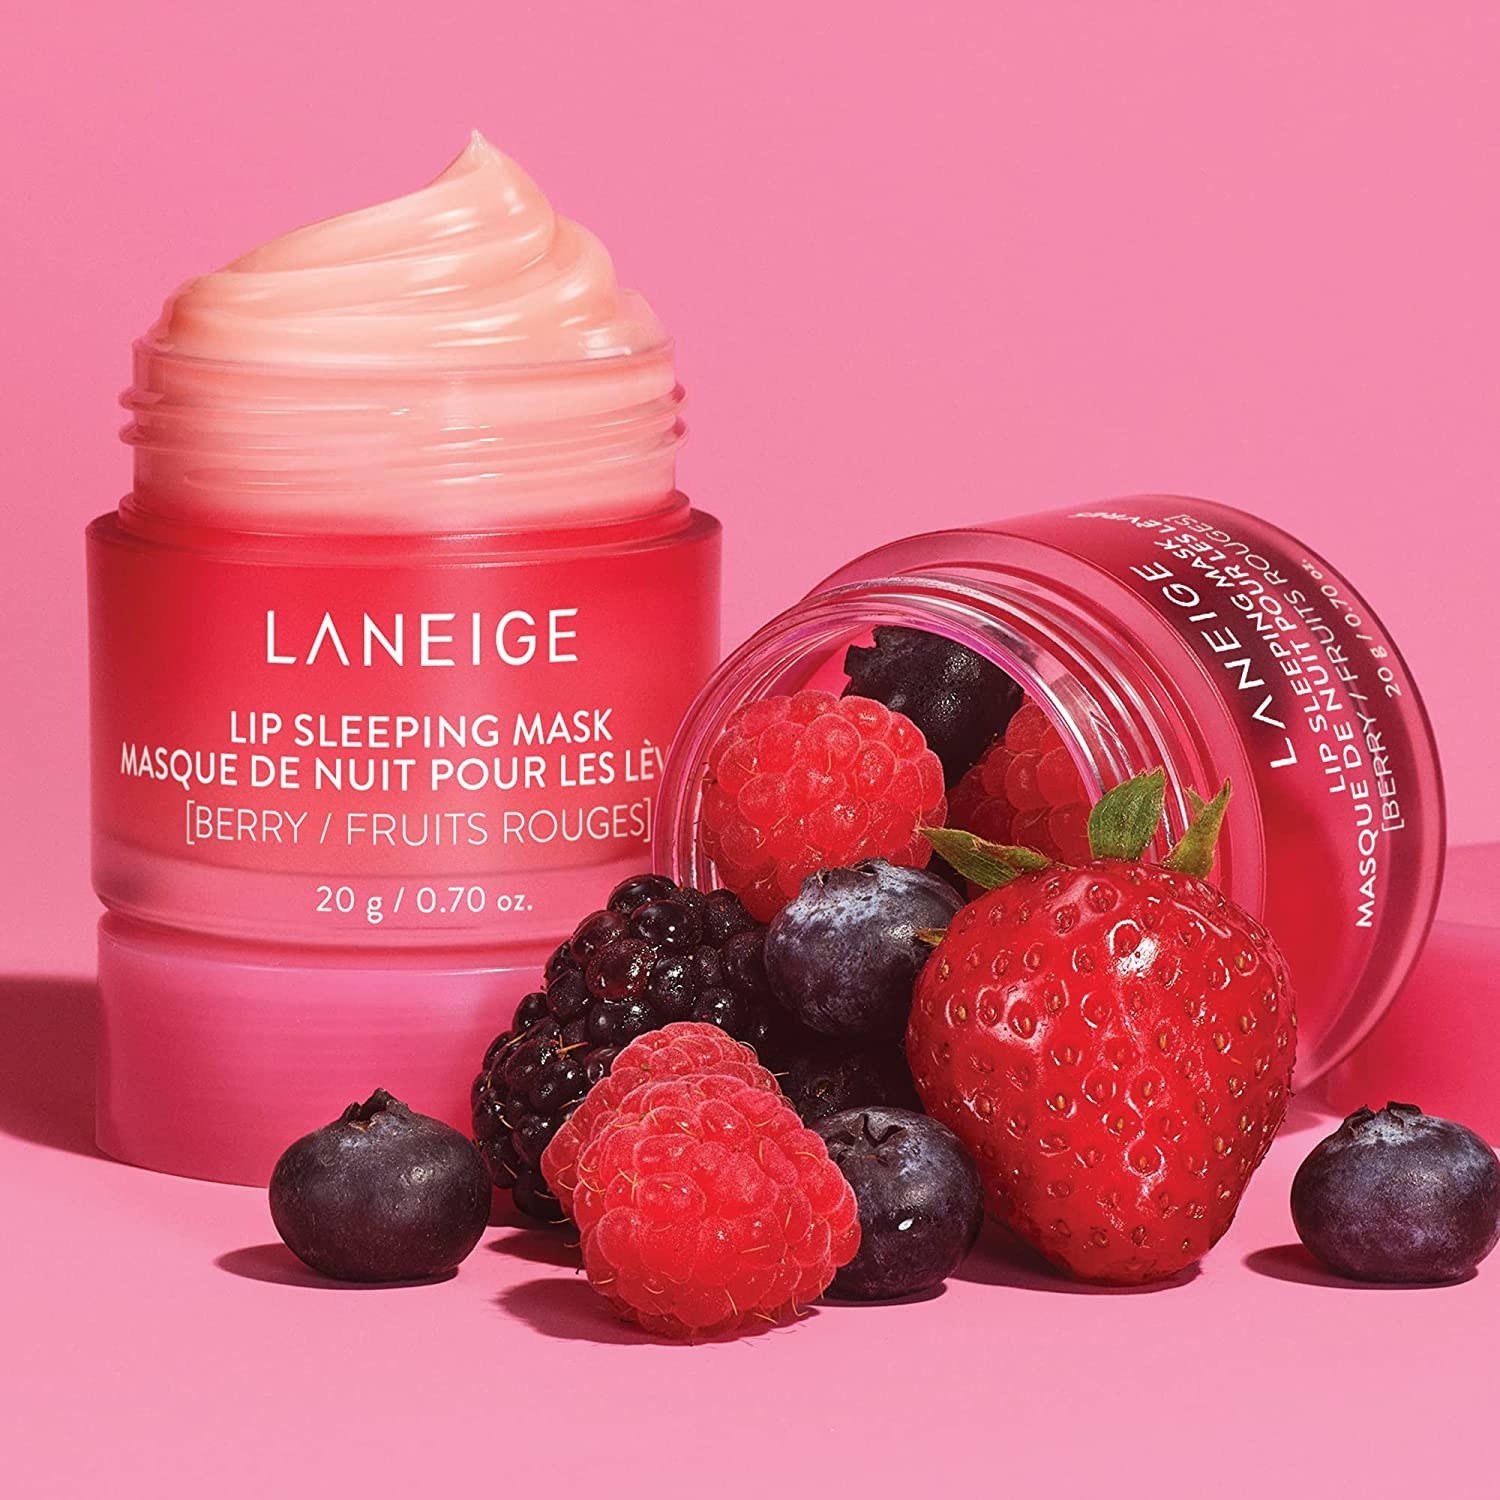 the laneige lip sleeping mask in a pink jar next to assorted berries